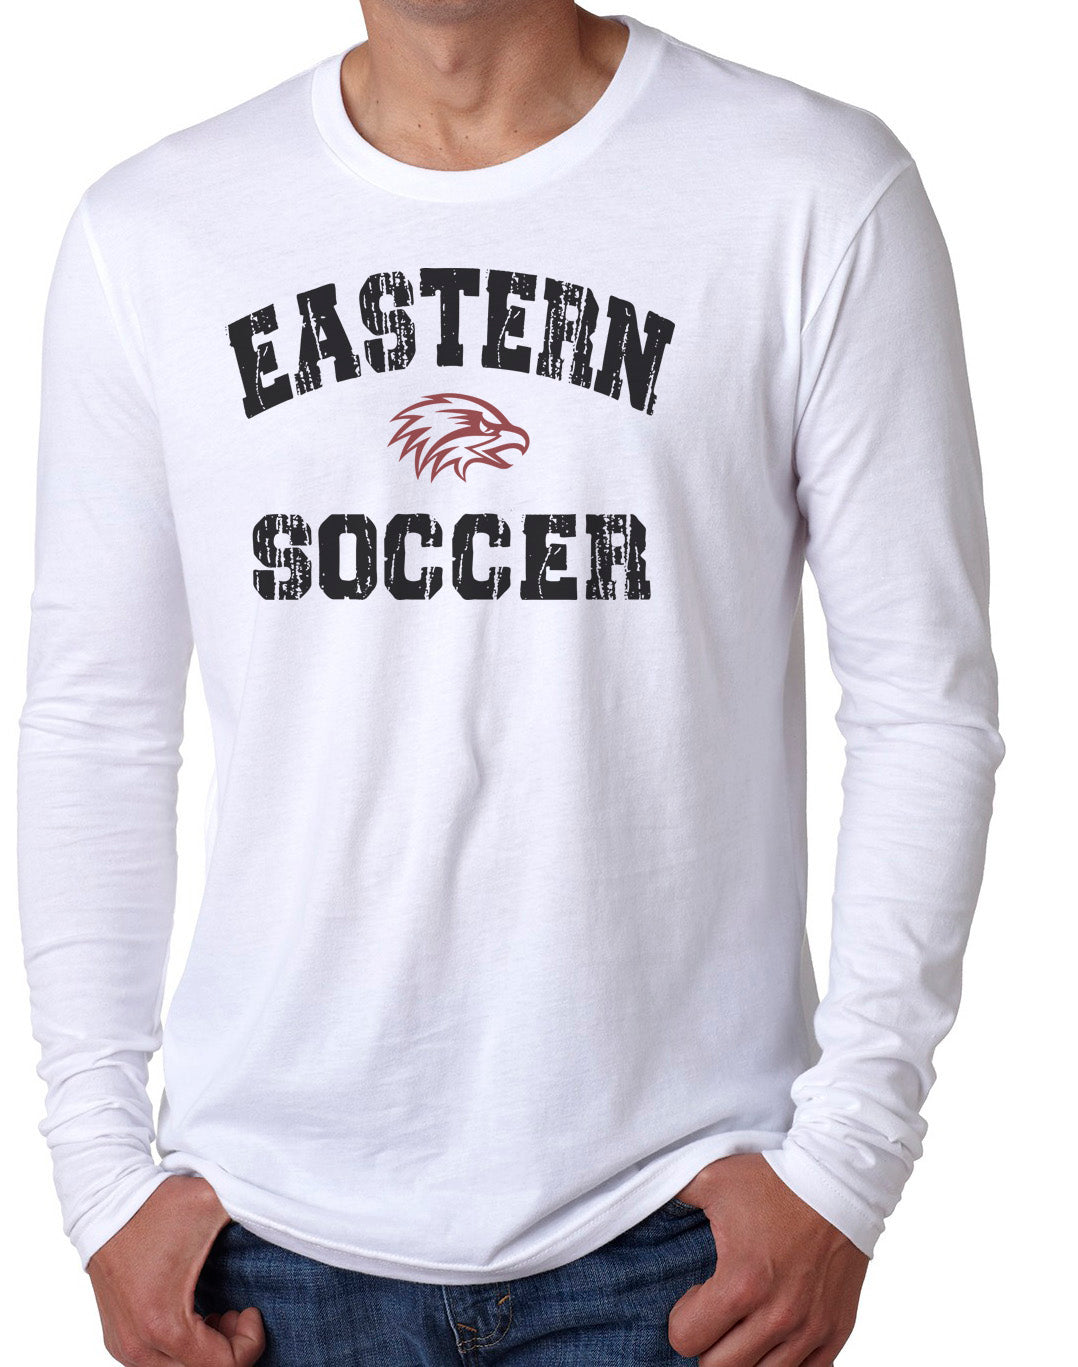 EASTERN SOCCER DISTRESSED Soft Cotton Long Sleeve Unisex T-Shirt